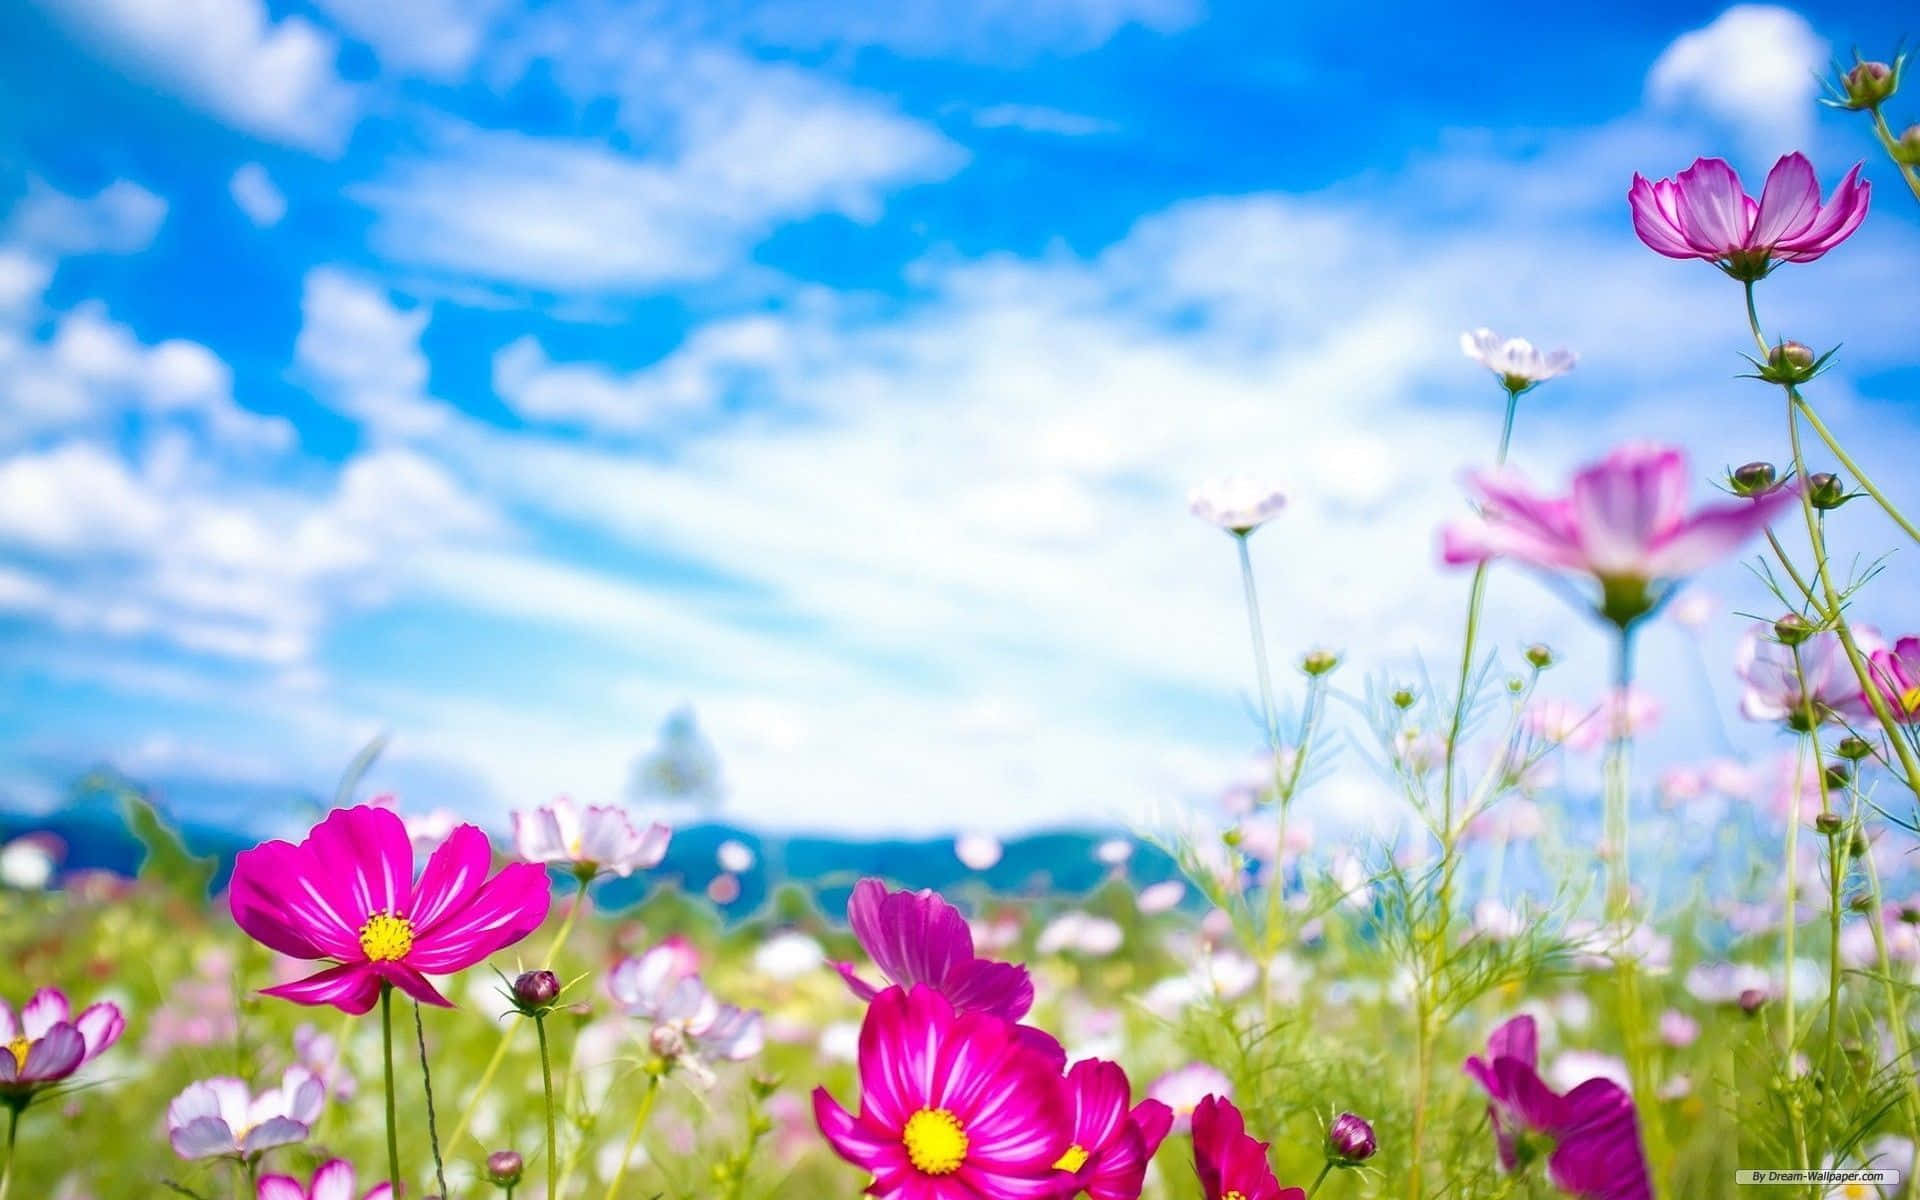 Pink And White Daisies Spring Flower Background